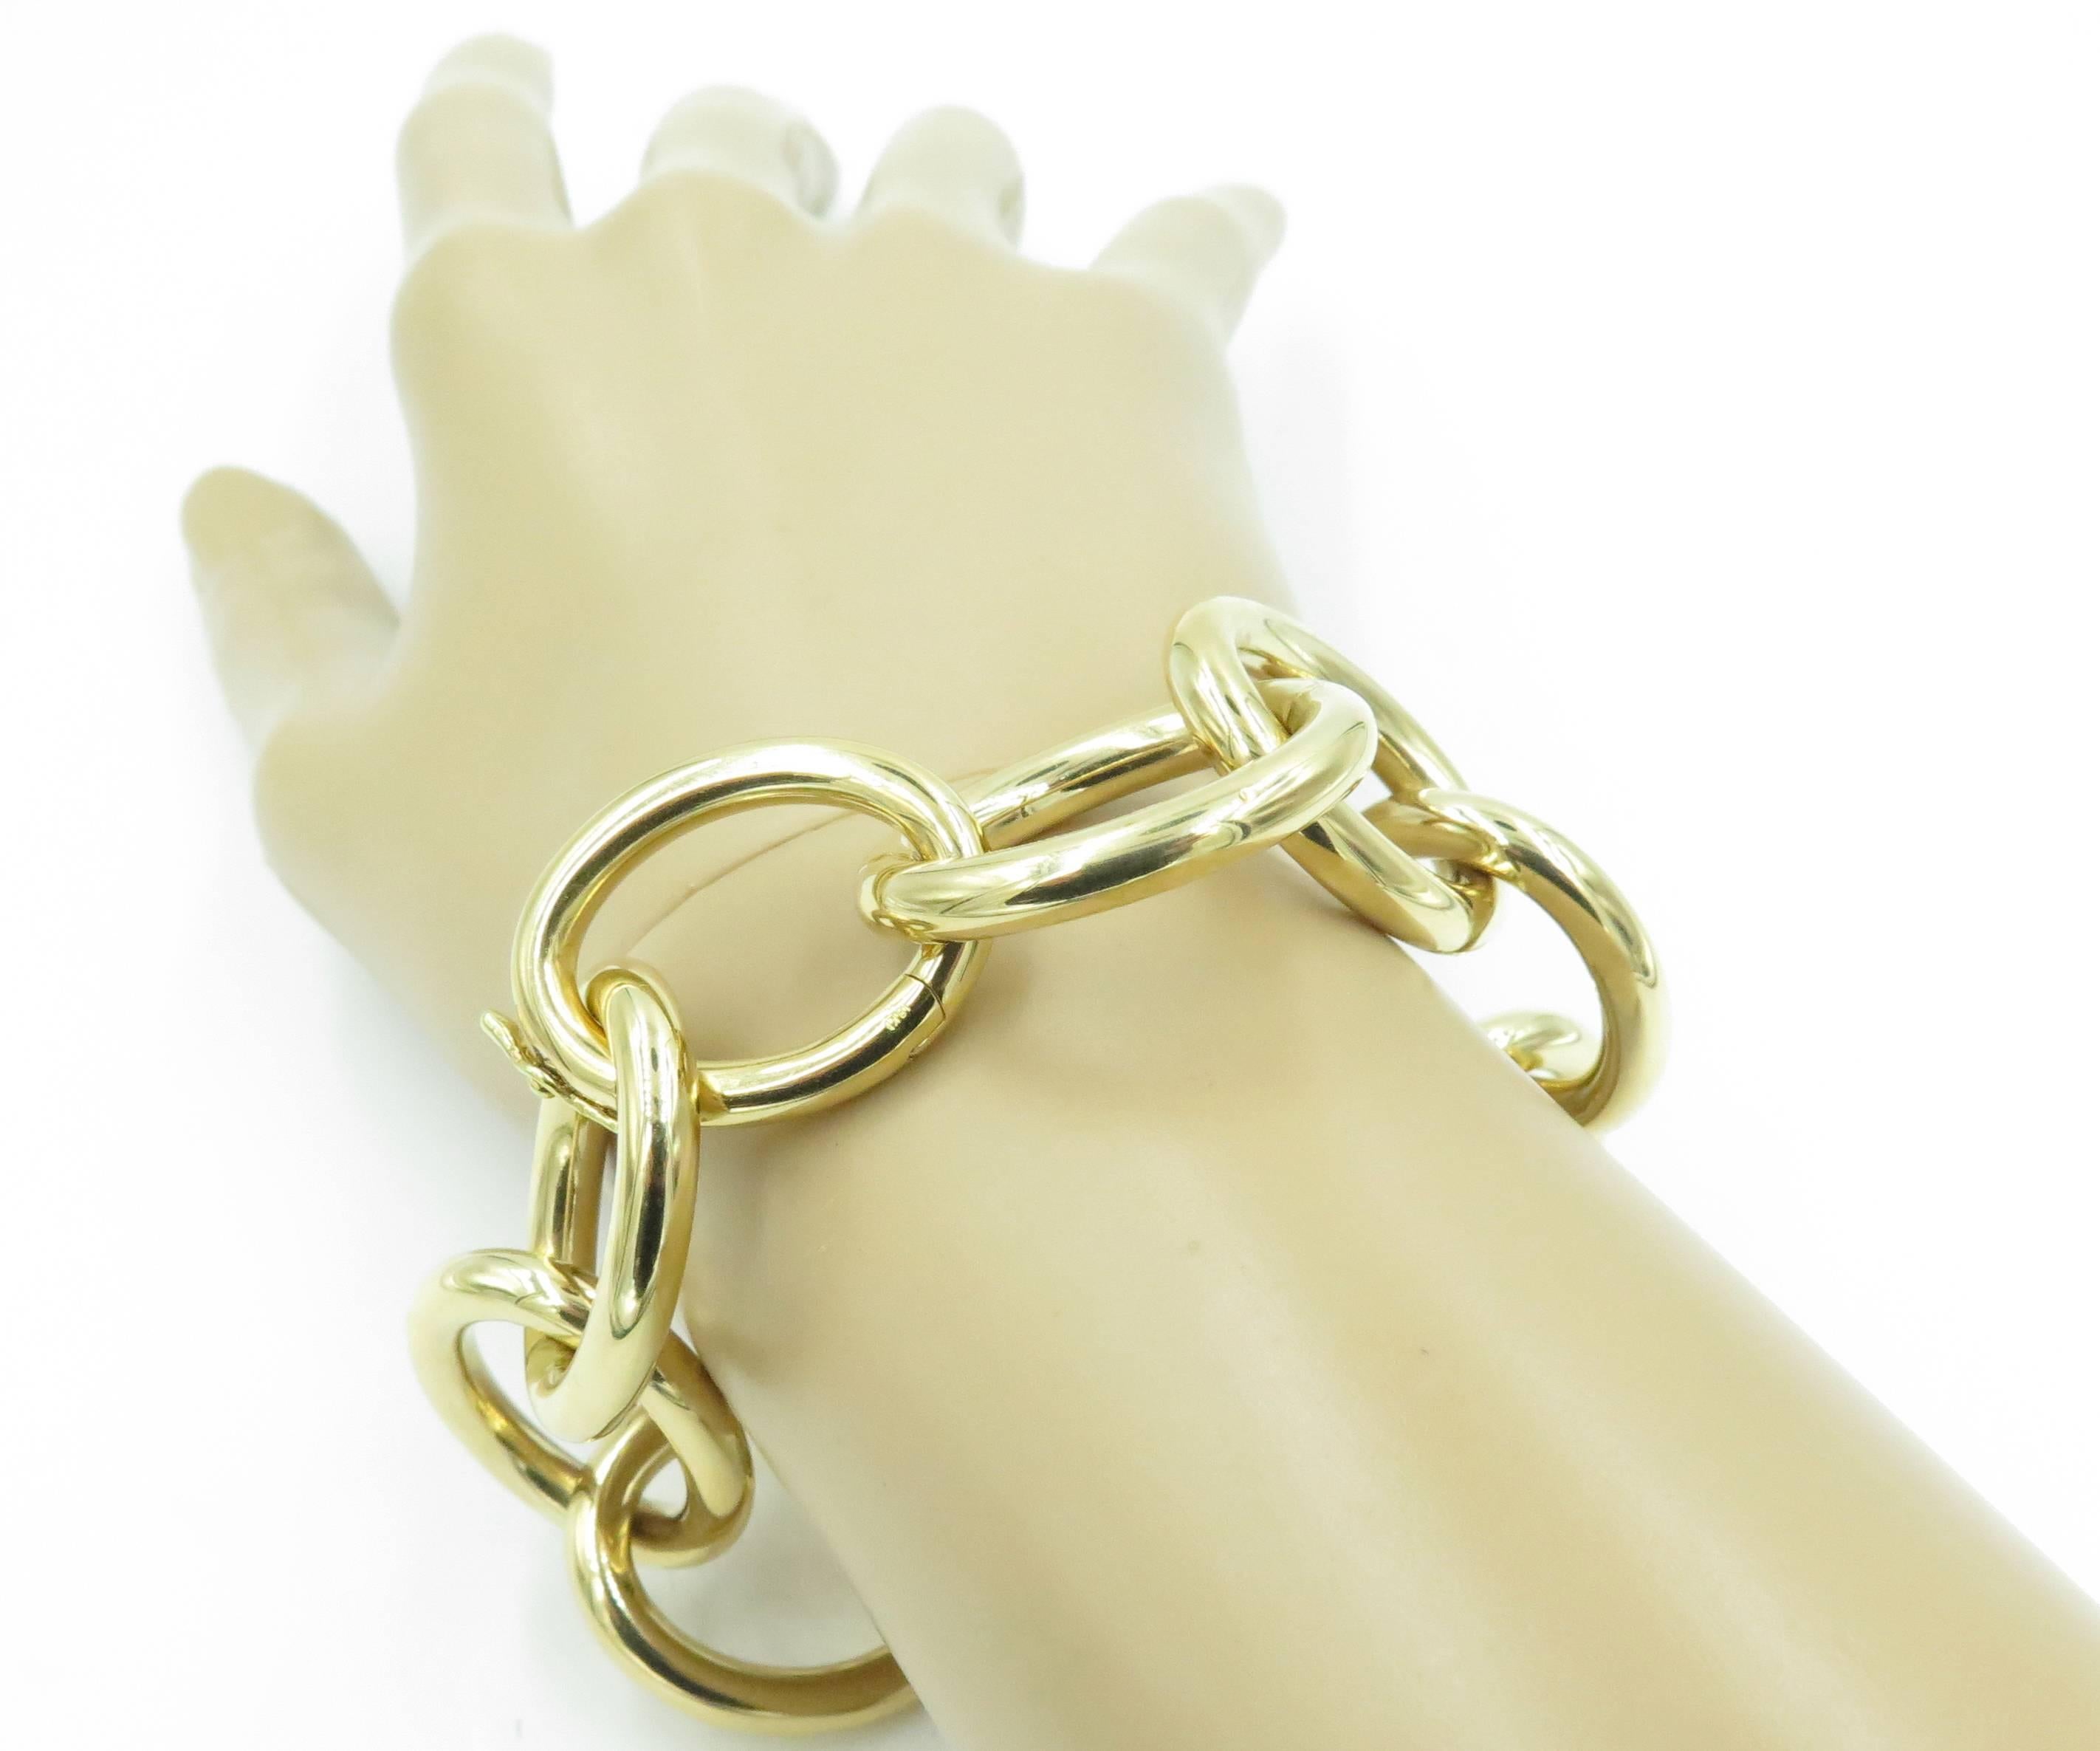 An 18 karat yellow gold open link bracelet.  Signed RFMAS  for Faraone Mennella.  The bracelet is designed as (10) ten interlocking links in a high polish finish.  Signed RFMAS.  Gross weight approximately 54.09 grams. 